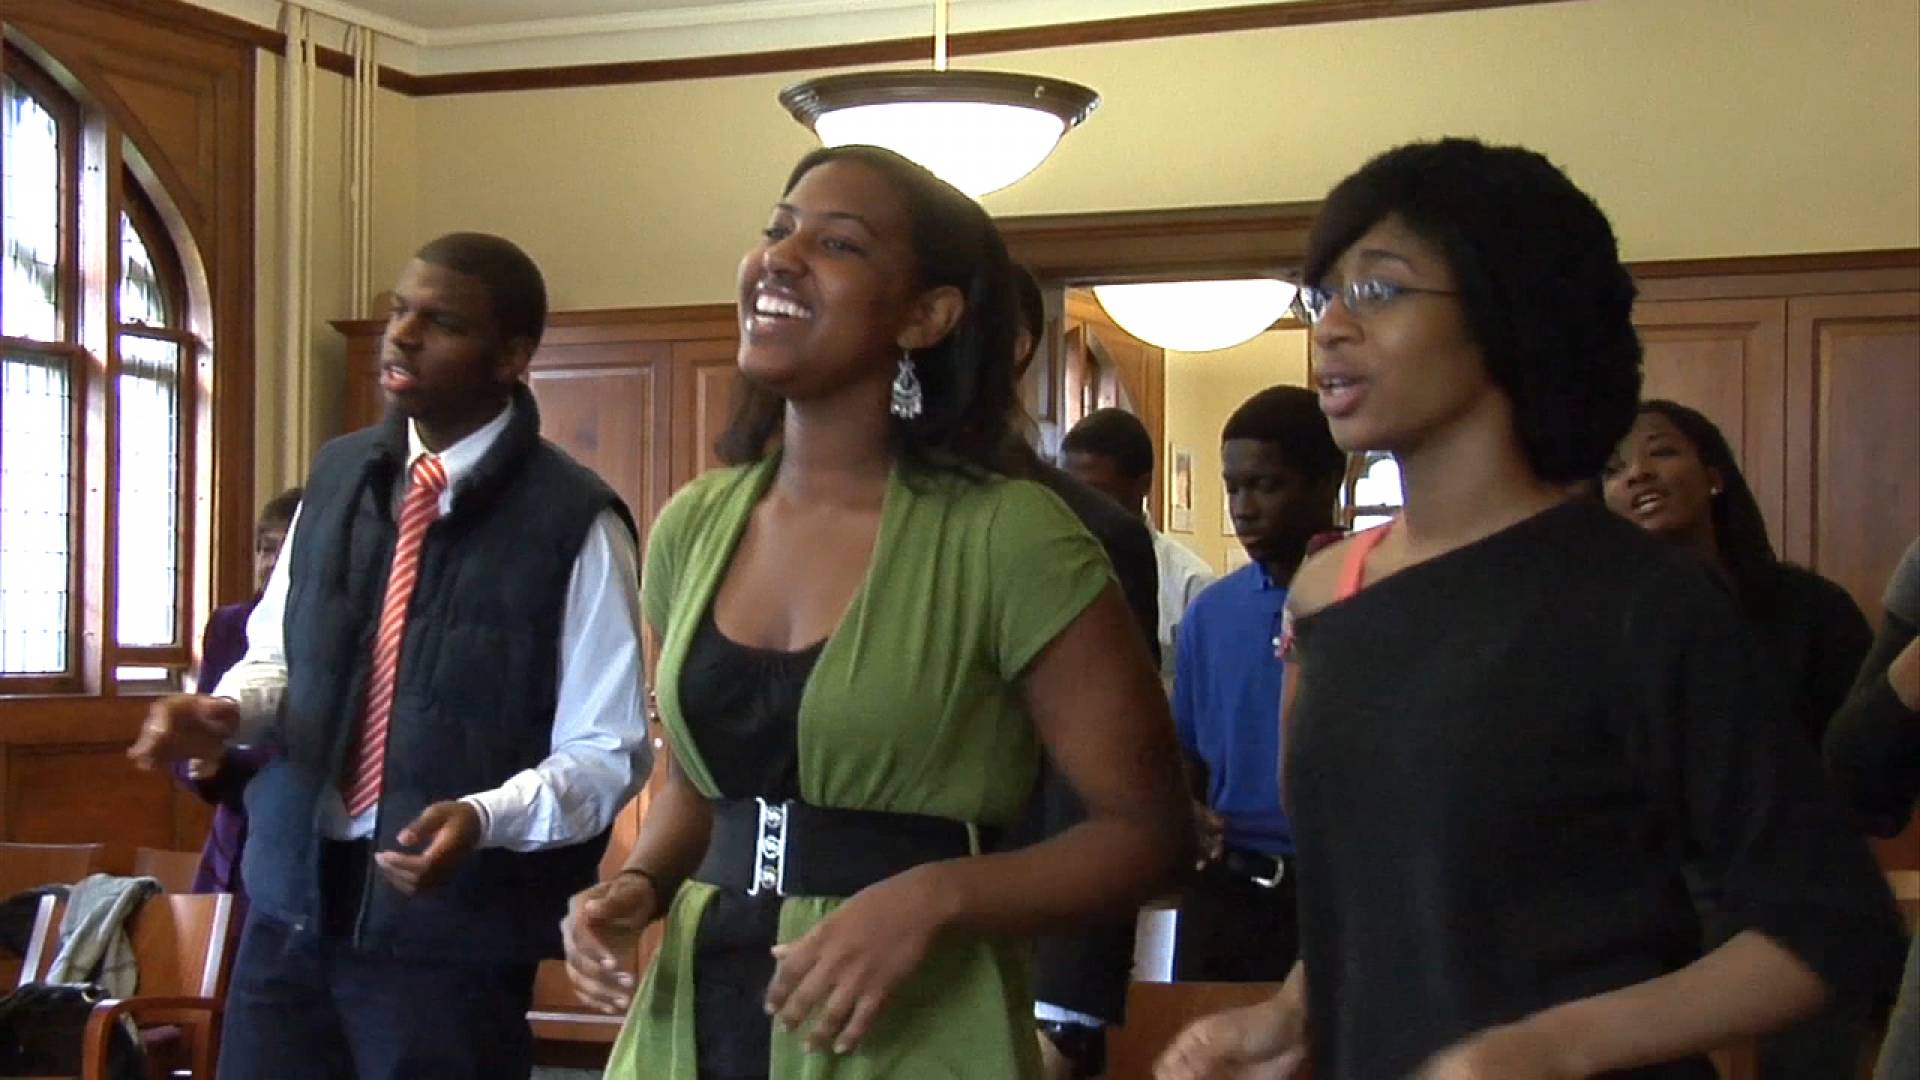 Students singing in Murray Dodge Hall